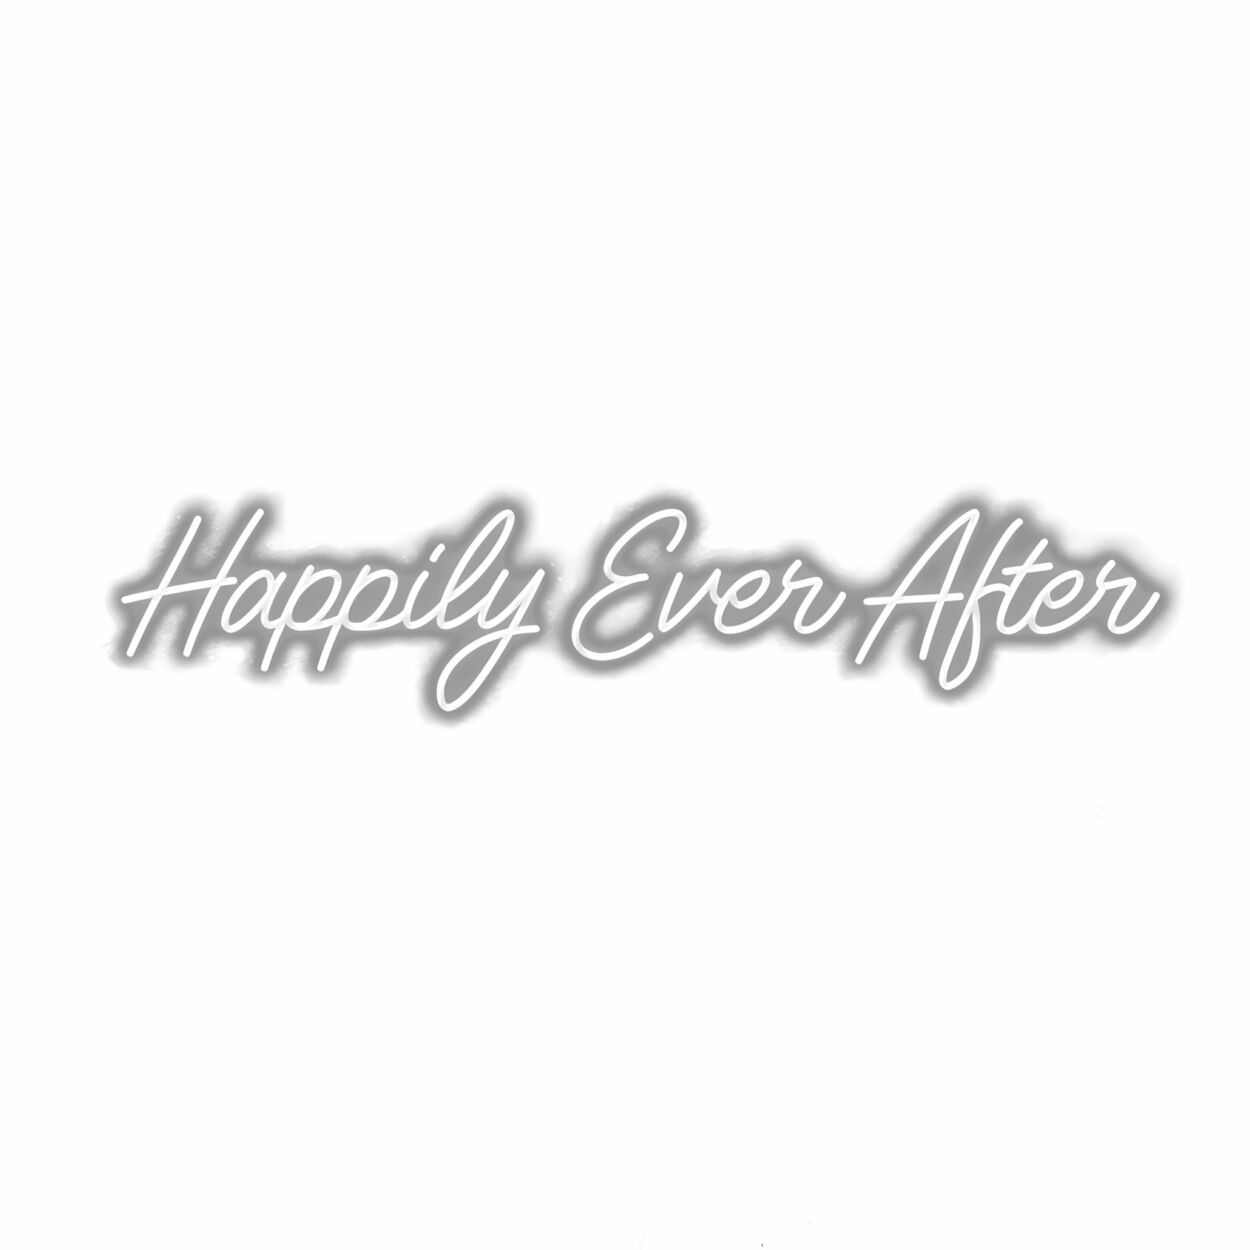 Elegant "Happily Ever After" cursive text shadow.